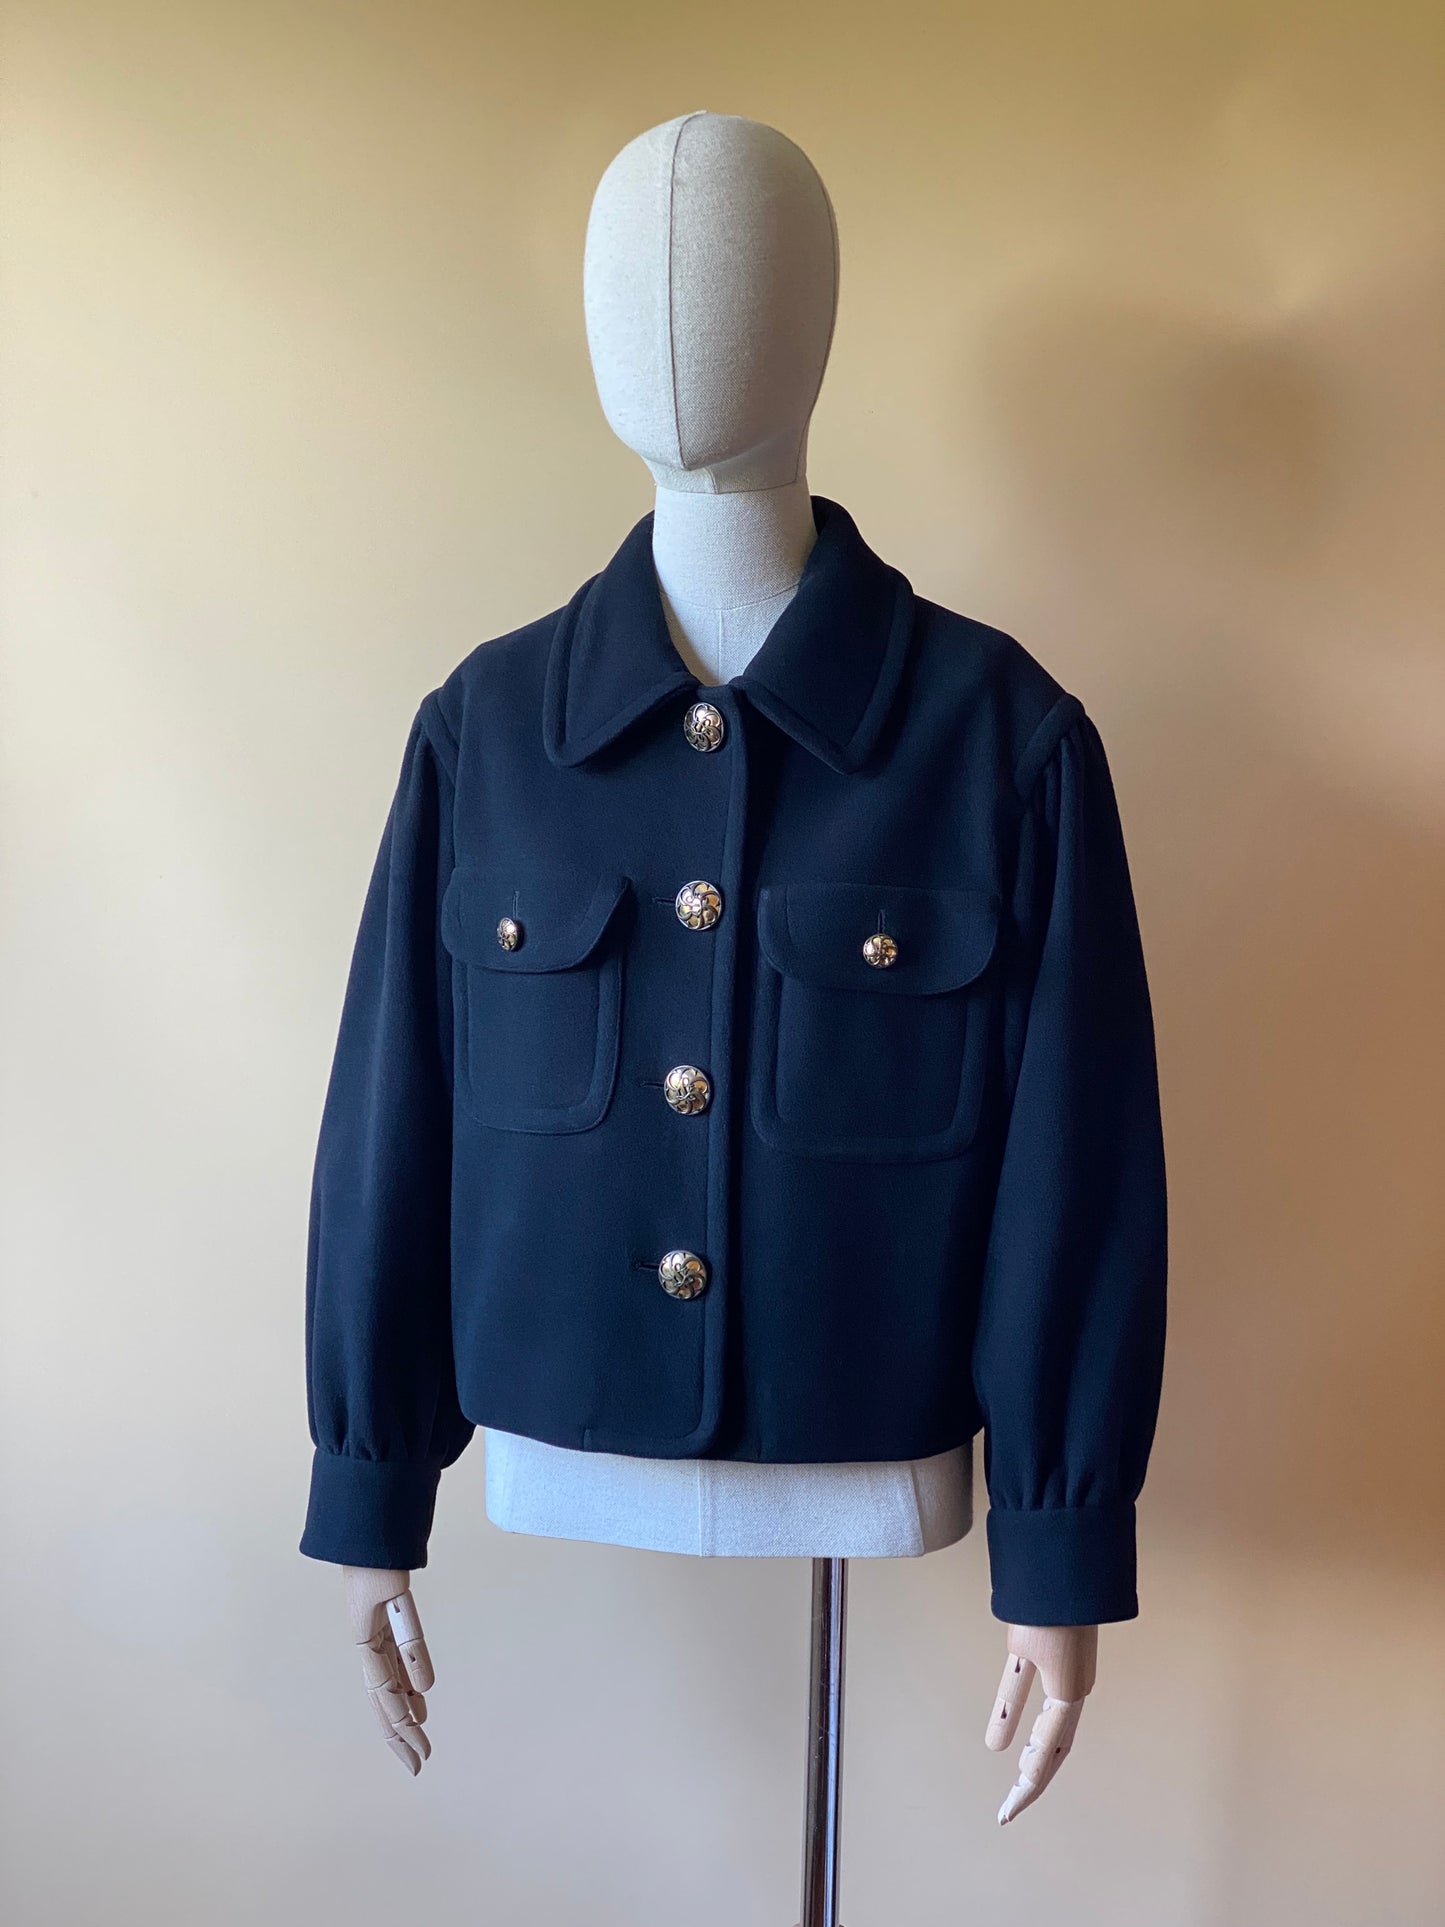 Vintage Moschino Cheap & Chic Wool & Mohair Jacket